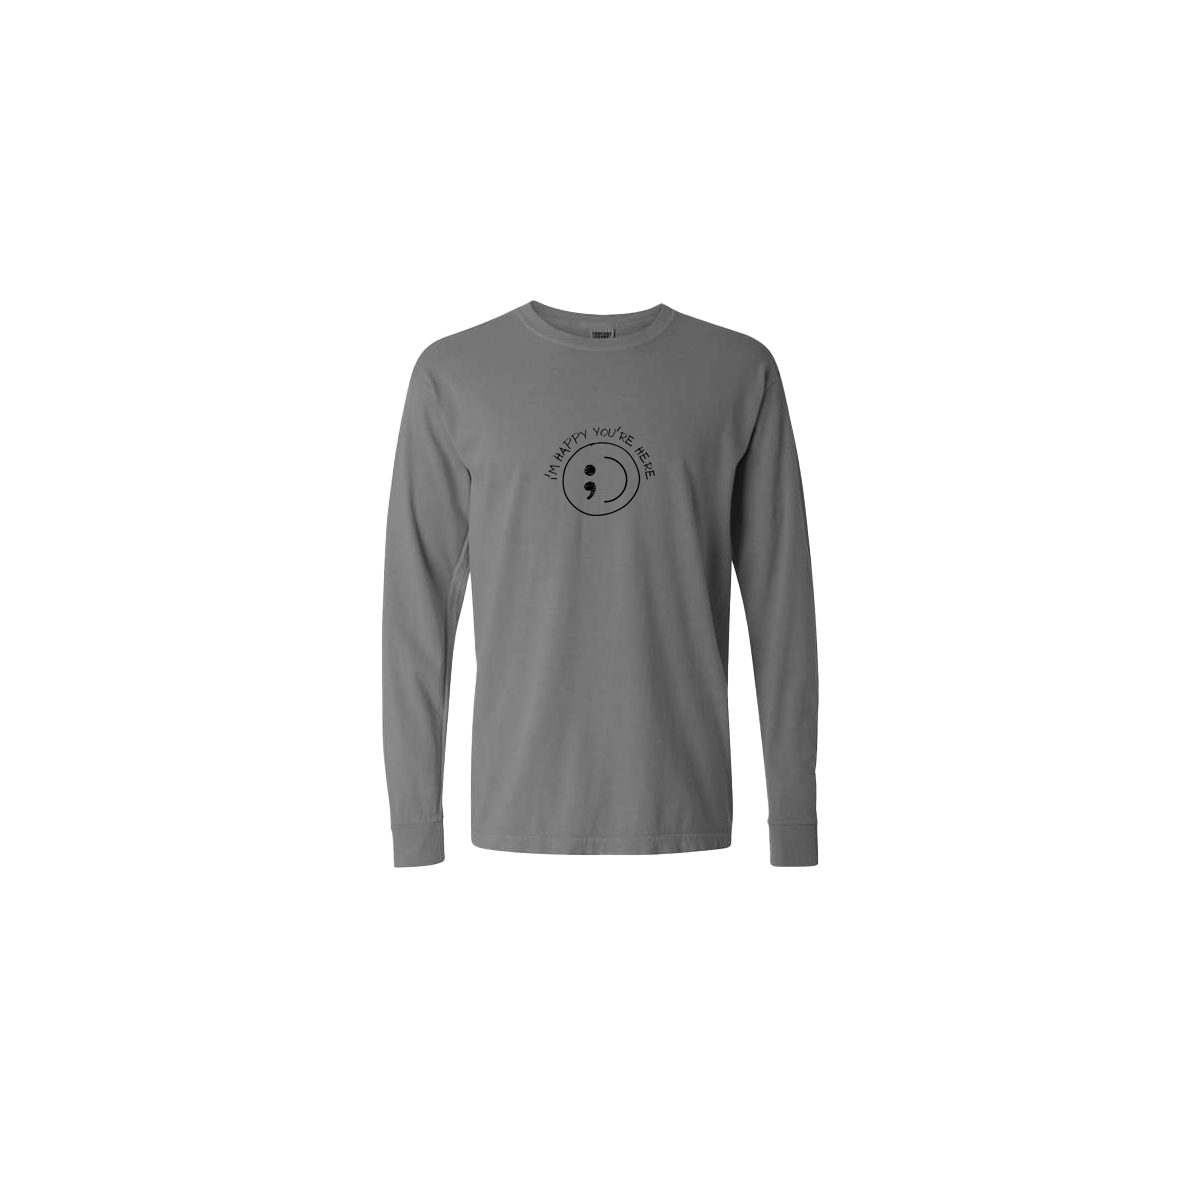 I'm Happy You're Here Embroidered Grey Long Sleeve Tshirt - Mental Health Awareness Clothing